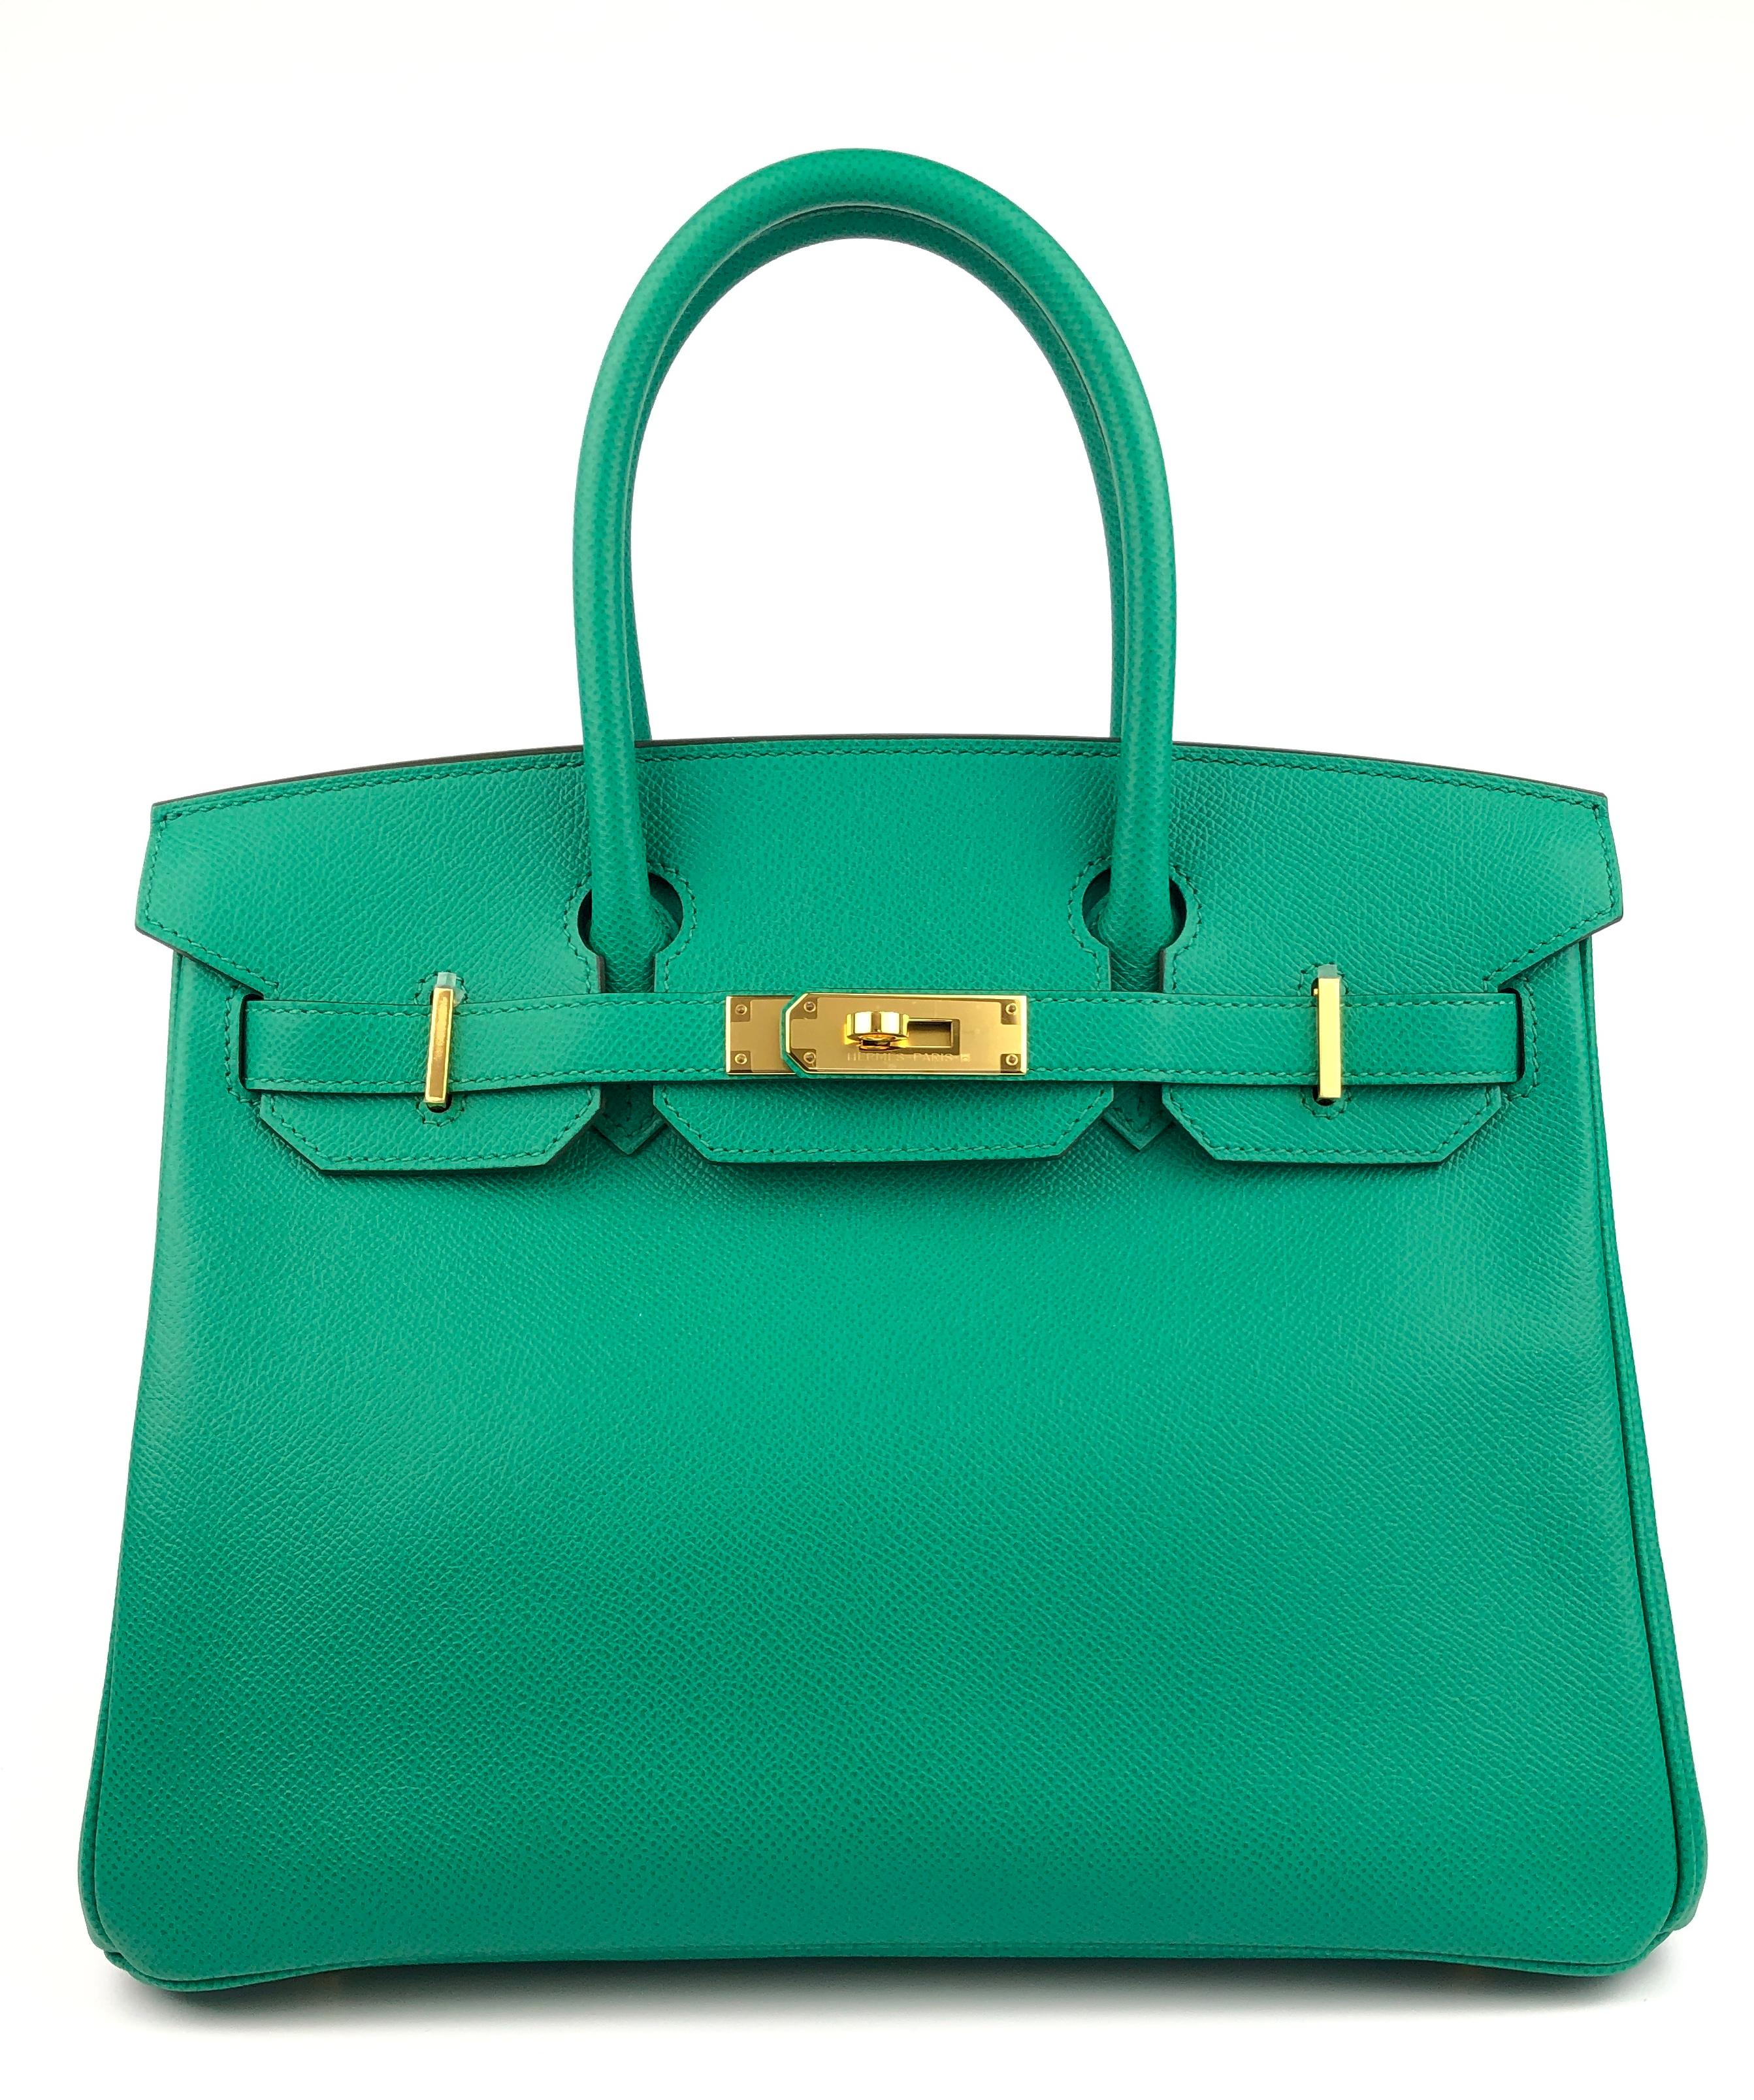 Absolutely Stunning 2021 Hermes Birkin 30 Vert Jade Epsom Leather Gold Hardware . Z Stamp 2021. Pristine Condition with Plastic on Hardware. Worn only a few times.

Please keep in mind that this is a pre owned item, the bag has been carried before,